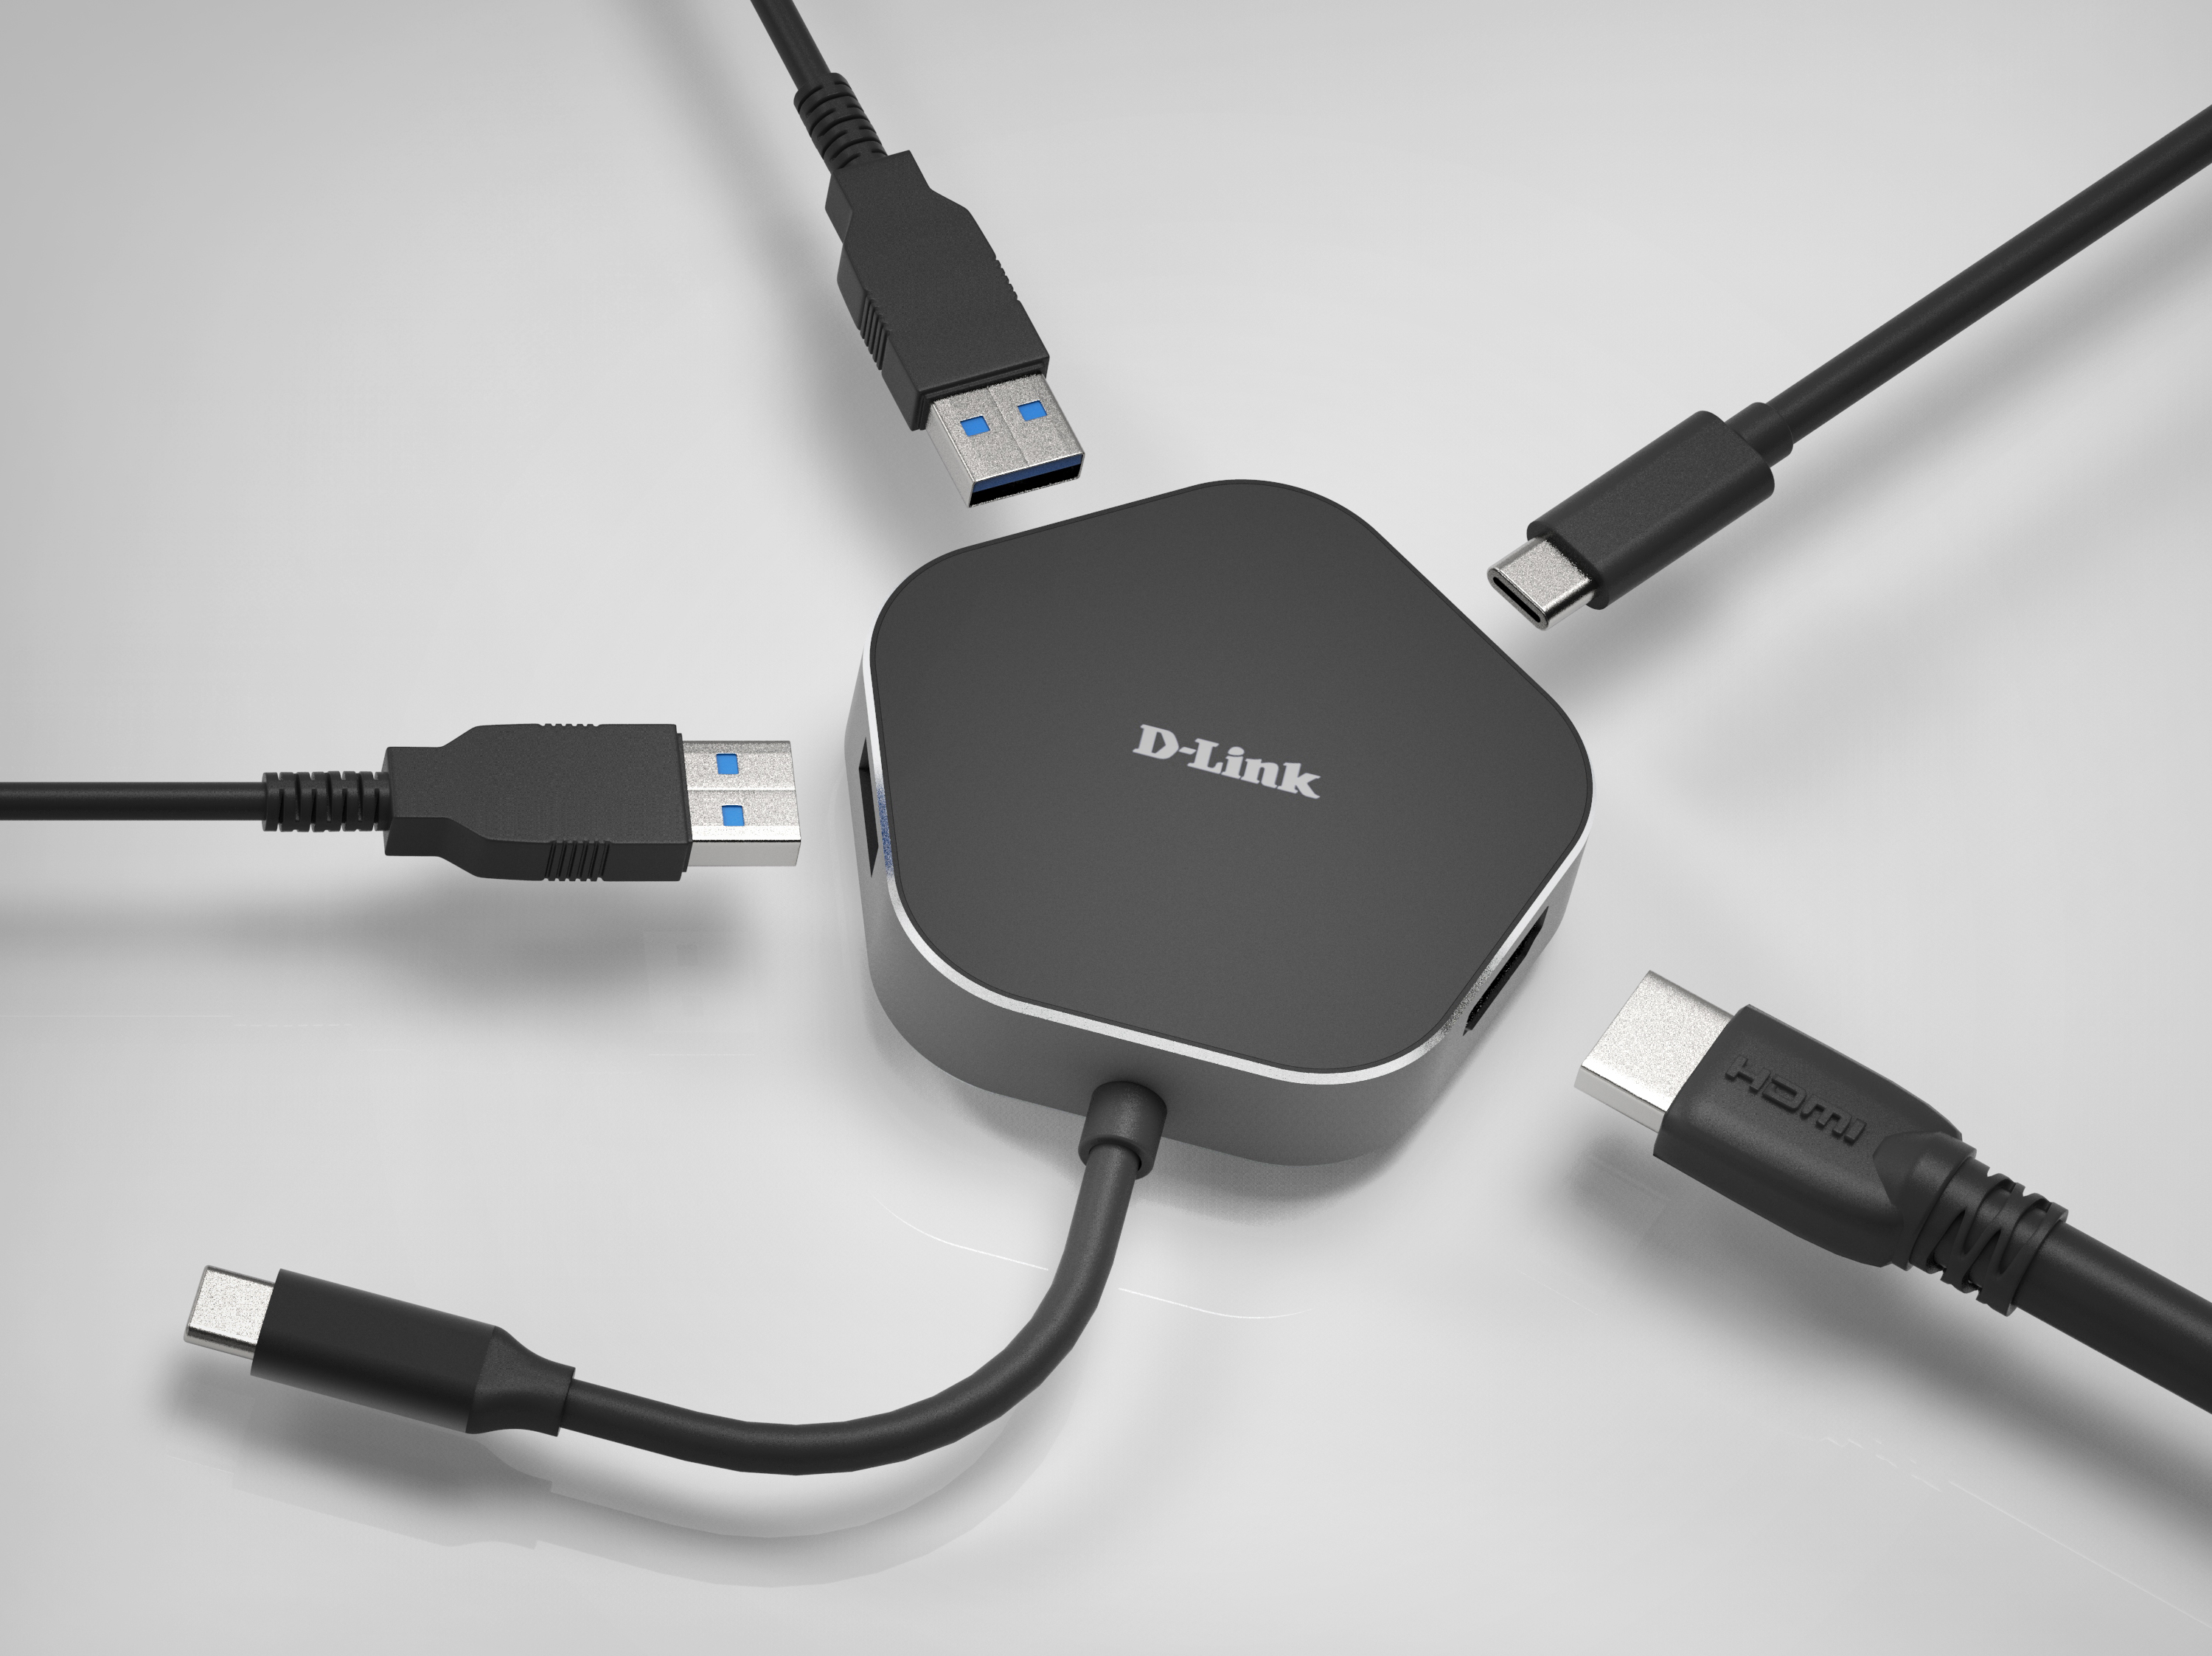 DUB-M420 4-in-1 USB-C Hub with HDMI Power | D-Link UK